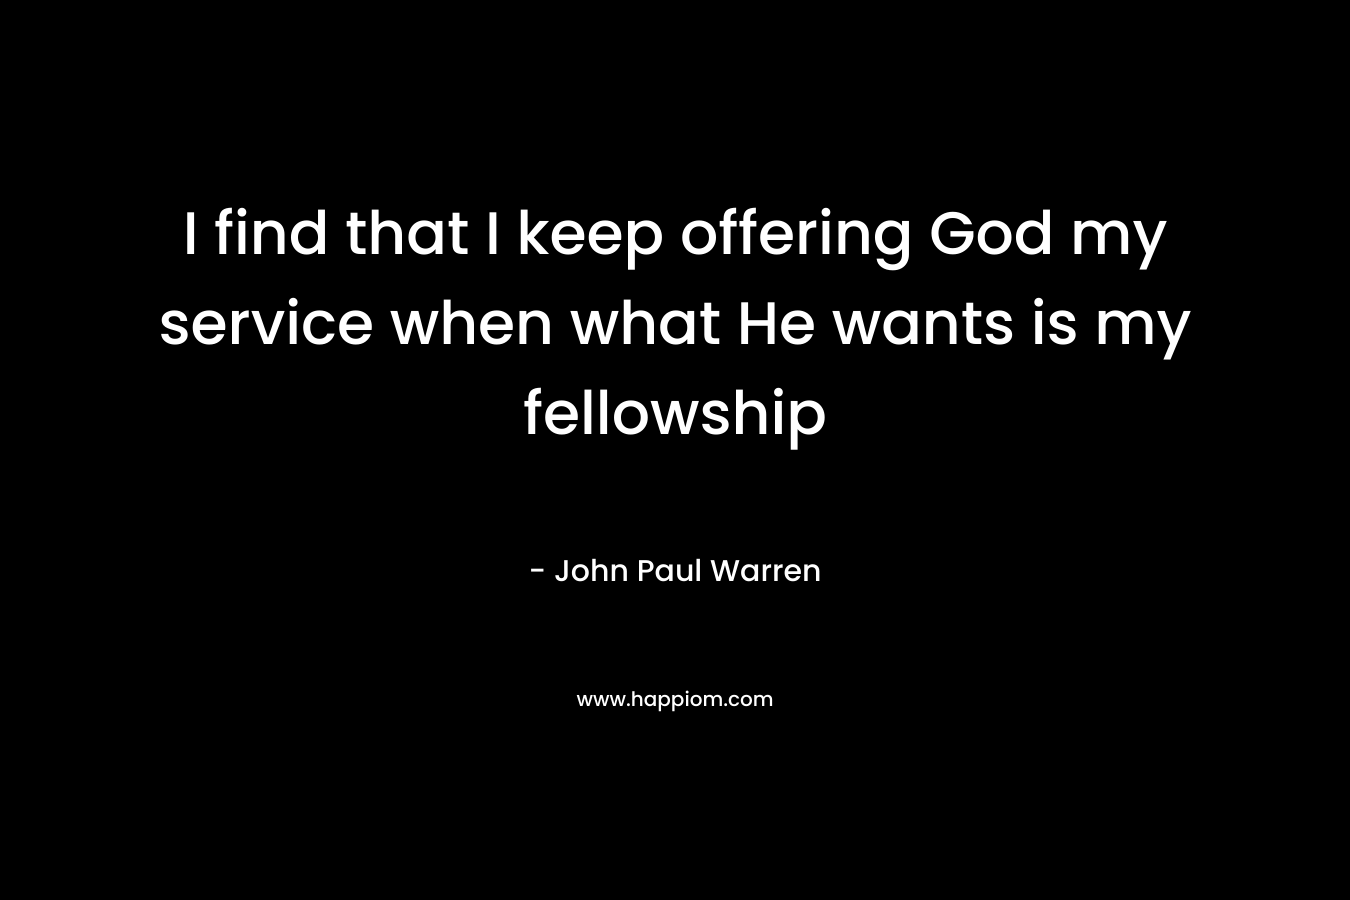 I find that I keep offering God my service when what He wants is my fellowship